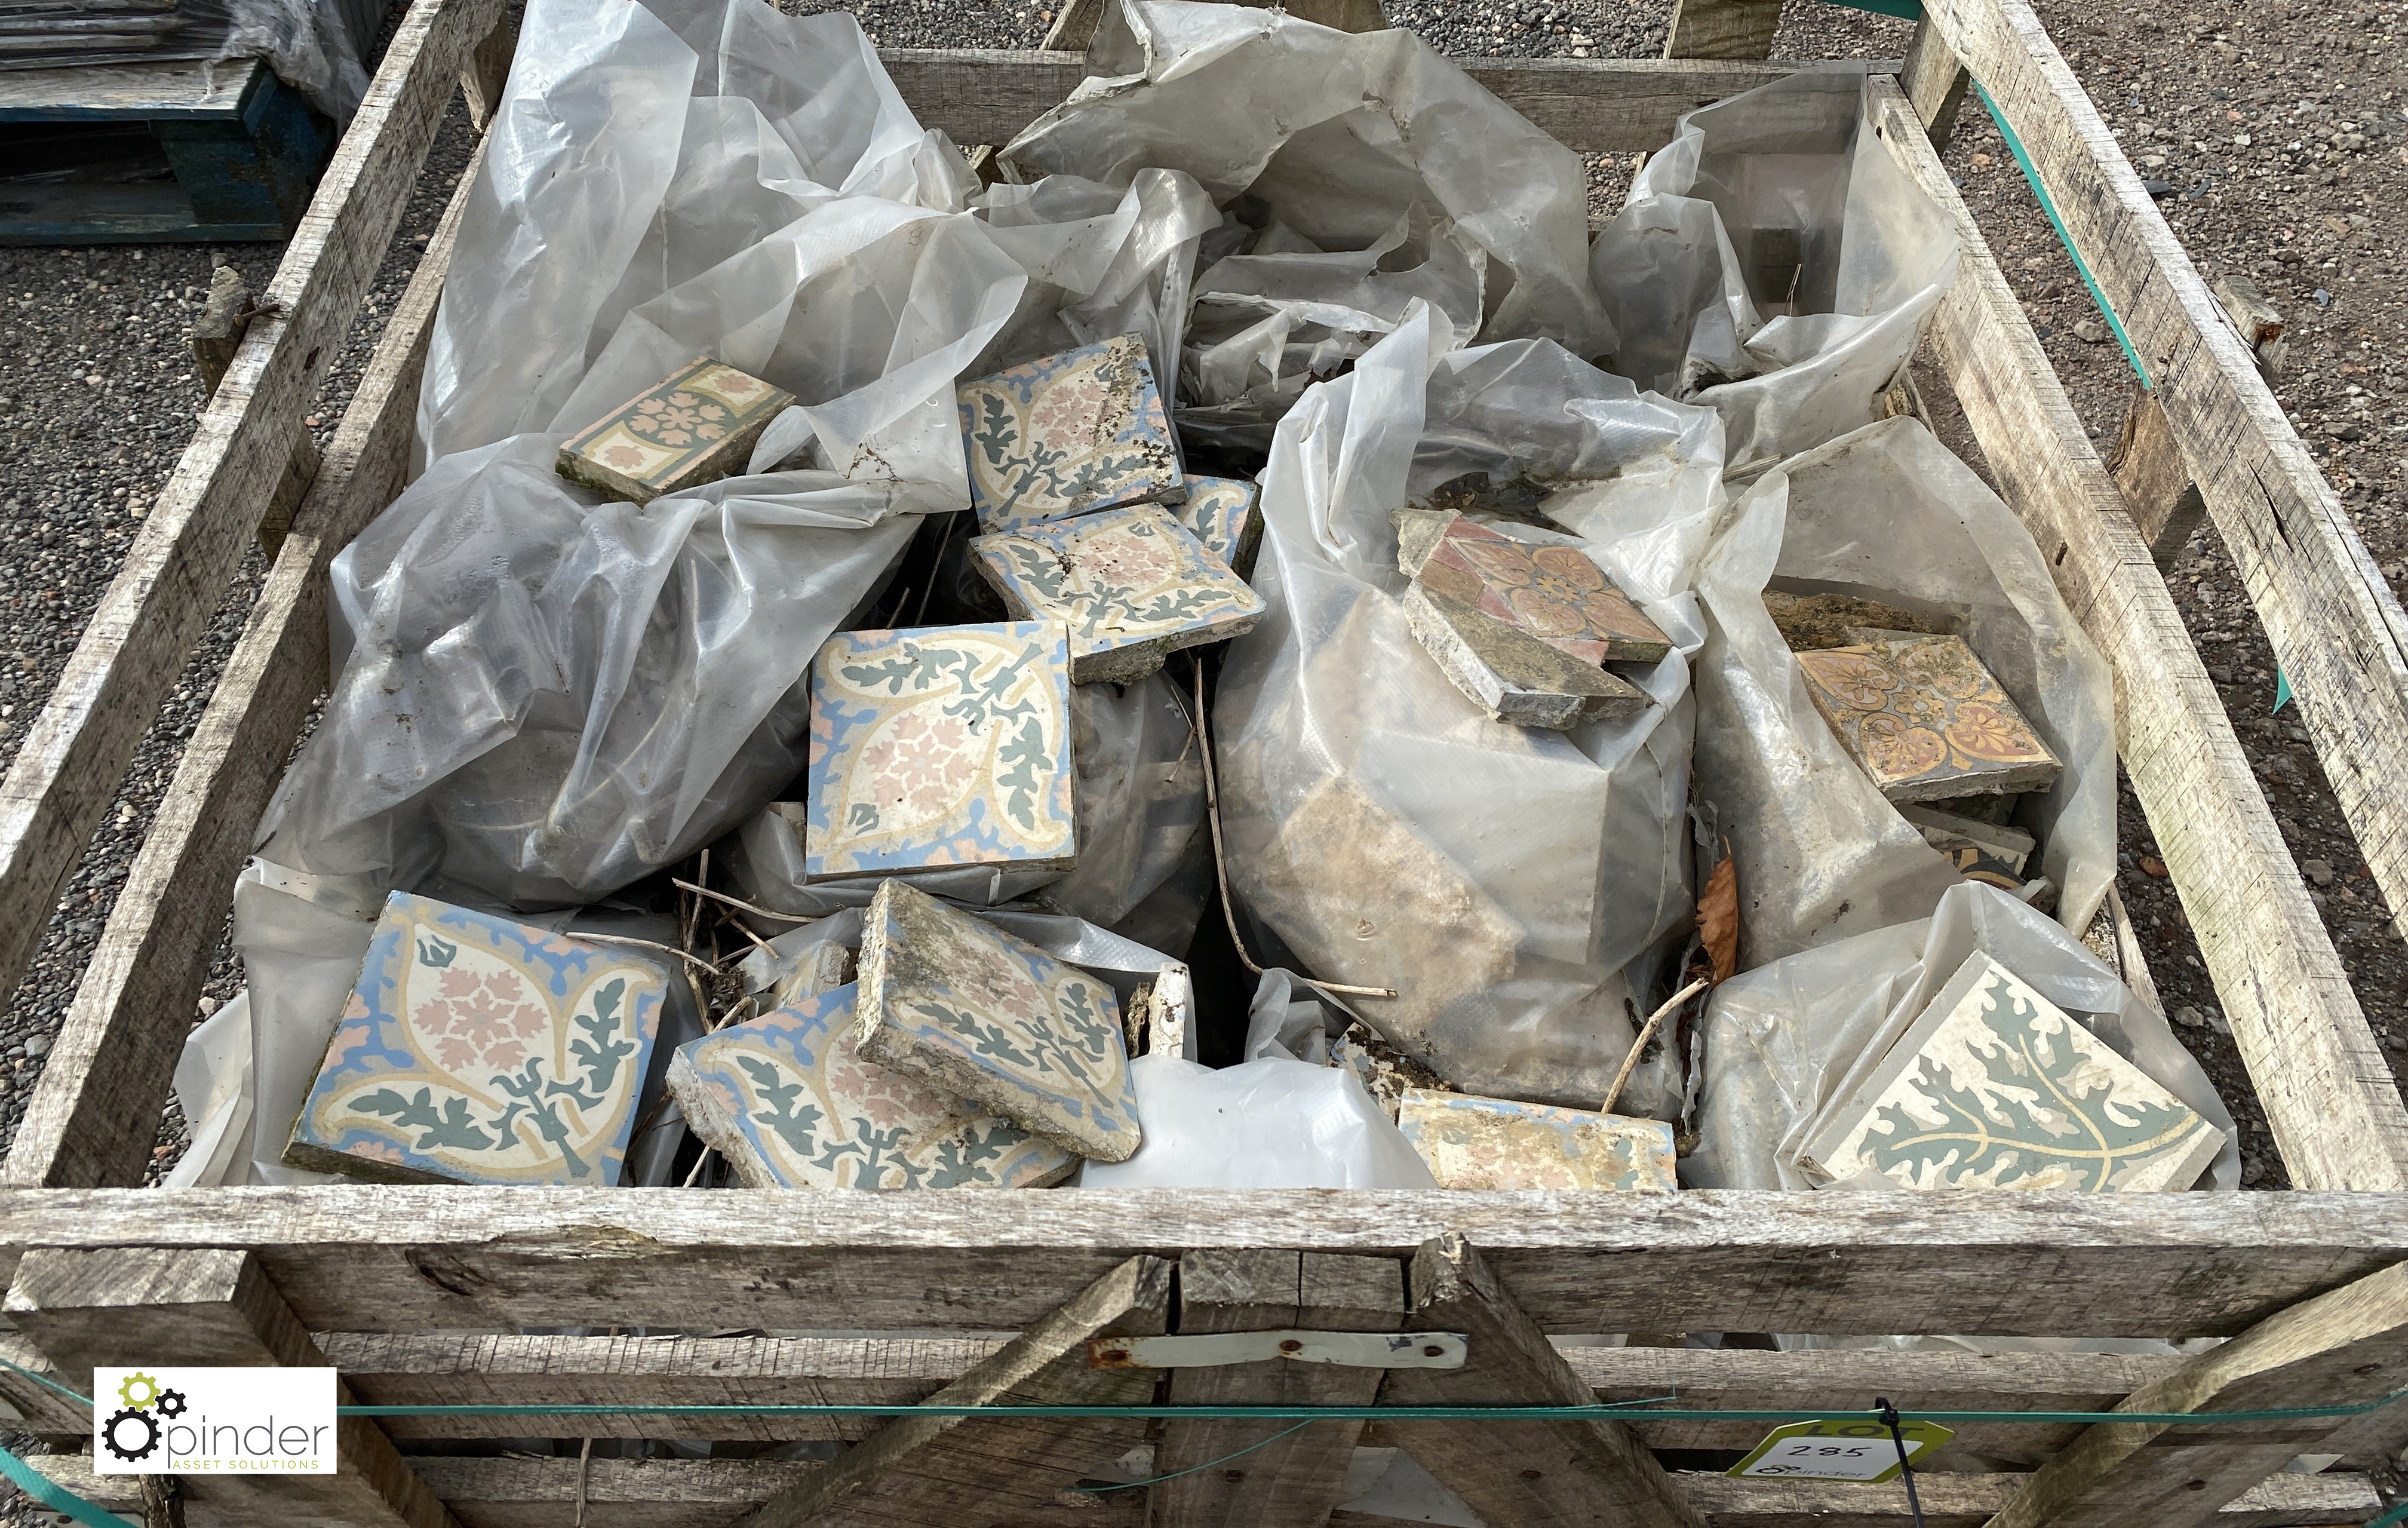 A quantity unrestored Encaustic French/English Floor Tiles, to crate